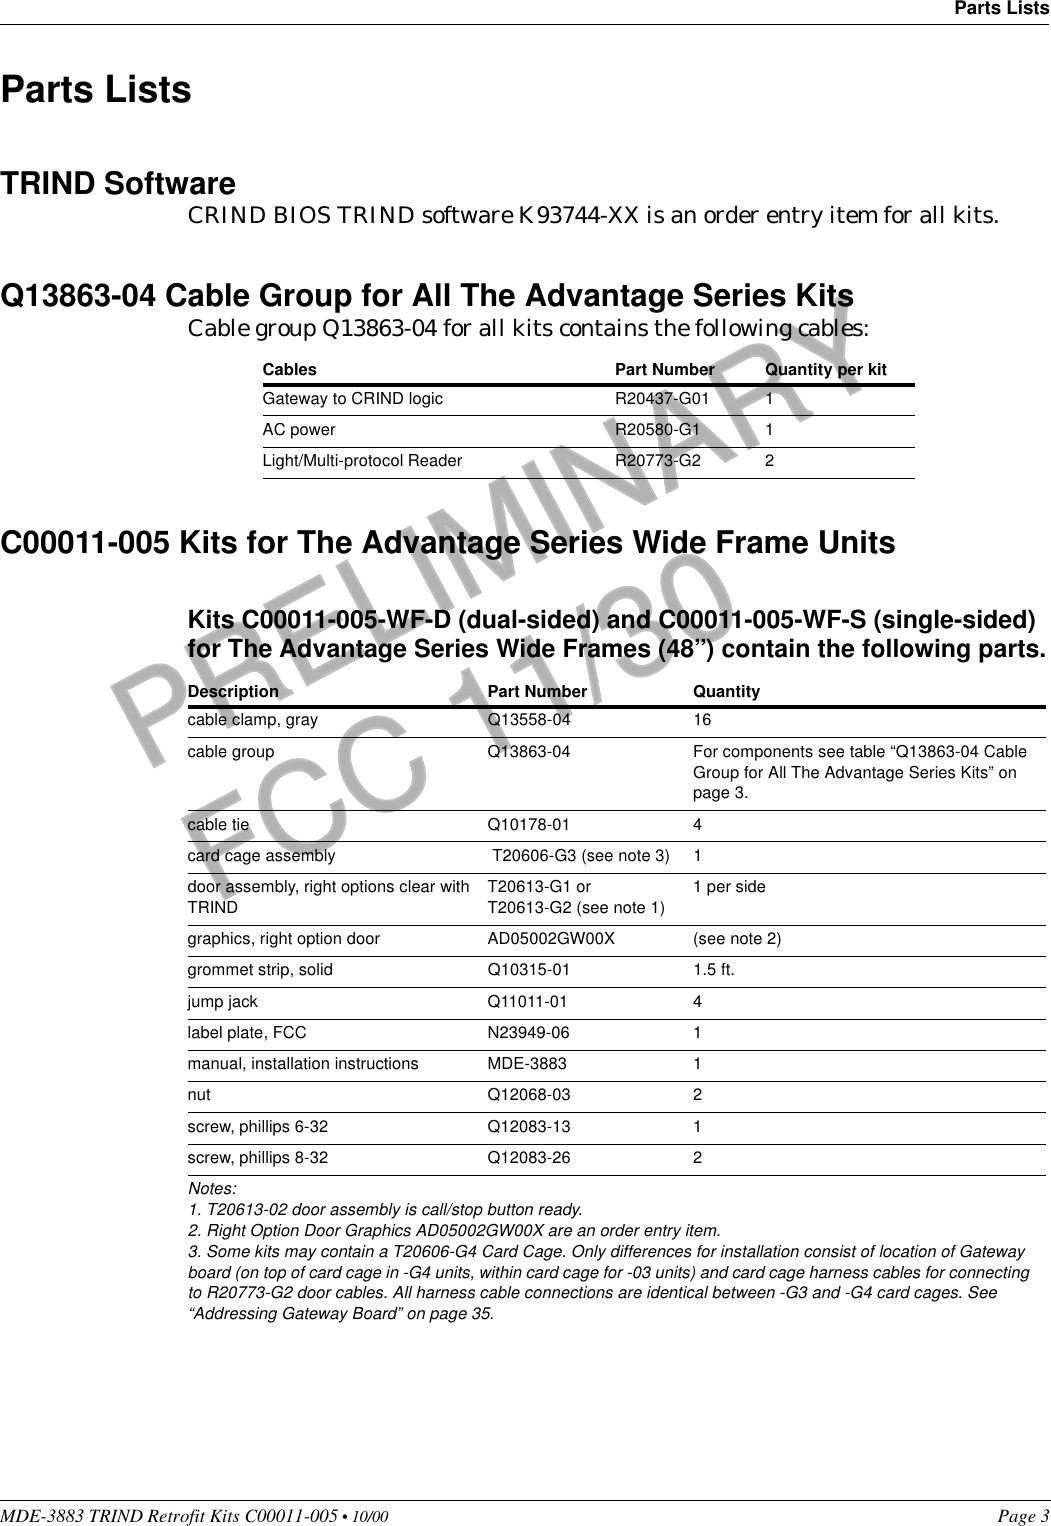 MDE-3883 TRIND Retrofit Kits C00011-005 • 10/00   Page 3Parts ListsPRELIMINARYFCC 11/30Parts ListsTRIND SoftwareCRIND BIOS TRIND software K93744-XX is an order entry item for all kits.Q13863-04 Cable Group for All The Advantage Series KitsCable group Q13863-04 for all kits contains the following cables:C00011-005 Kits for The Advantage Series Wide Frame UnitsKits C00011-005-WF-D (dual-sided) and C00011-005-WF-S (single-sided) for The Advantage Series Wide Frames (48’’) contain the following parts.Cables Part Number Quantity per kitGateway to CRIND logic R20437-G01 1AC power R20580-G1 1Light/Multi-protocol Reader R20773-G2 2Description Part Number Quantity cable clamp, gray Q13558-04 16cable group Q13863-04 For components see table “Q13863-04 Cable Group for All The Advantage Series Kits” on page 3.cable tie Q10178-01 4card cage assembly  T20606-G3 (see note 3) 1door assembly, right options clear with TRINDT20613-G1 orT20613-G2 (see note 1)1 per sidegraphics, right option door AD05002GW00X (see note 2)grommet strip, solid Q10315-01 1.5 ft.jump jack Q11011-01 4label plate, FCC N23949-06 1manual, installation instructions MDE-3883 1nut Q12068-03 2screw, phillips 6-32 Q12083-13 1screw, phillips 8-32 Q12083-26 2Notes:1. T20613-02 door assembly is call/stop button ready.2. Right Option Door Graphics AD05002GW00X are an order entry item.3. Some kits may contain a T20606-G4 Card Cage. Only differences for installation consist of location of Gateway board (on top of card cage in -G4 units, within card cage for -03 units) and card cage harness cables for connecting to R20773-G2 door cables. All harness cable connections are identical between -G3 and -G4 card cages. See “Addressing Gateway Board” on page 35. 